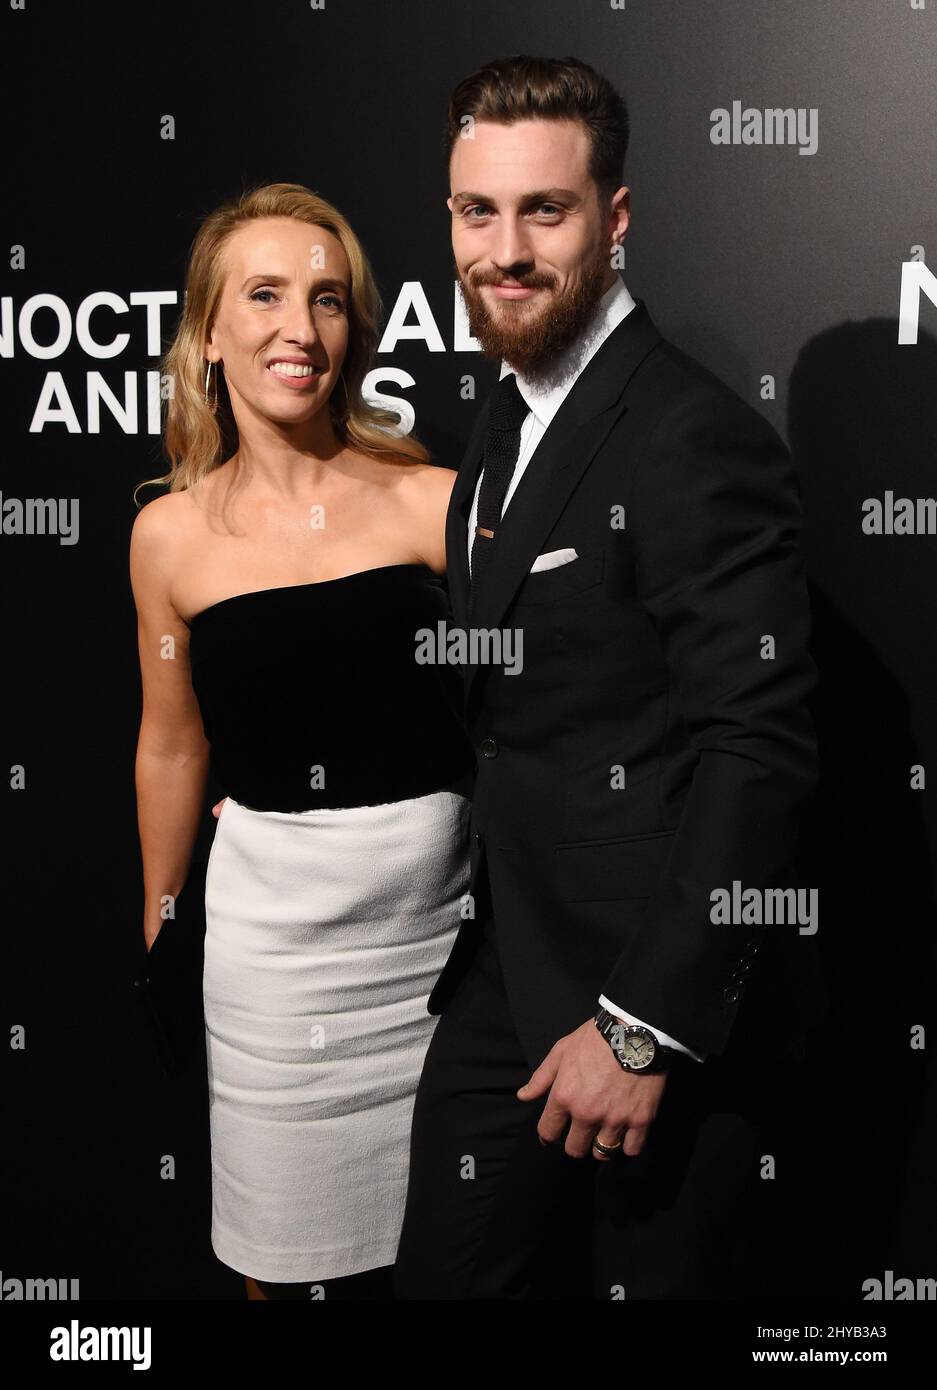 Aaron Taylor-Johnson and Sam Taylor-Johnson arriving to the 'Nocturnal Animals' Los Angeles Screening held at the Hammer Museum Stock Photo